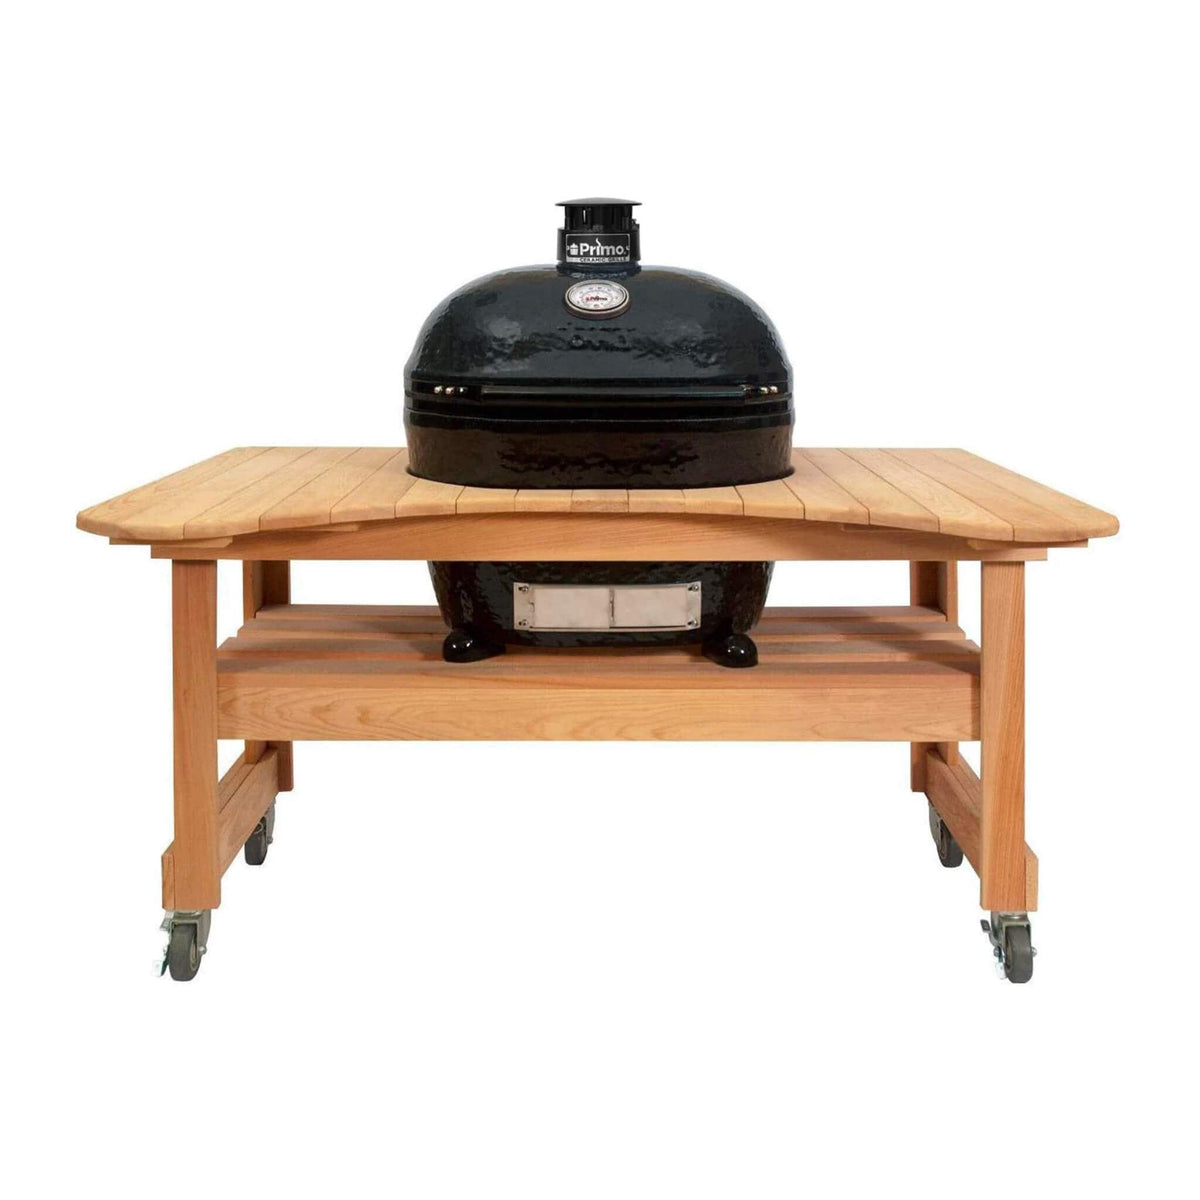 Primo Grill Cypress Table for PGCXLH, PGCJRH and Round